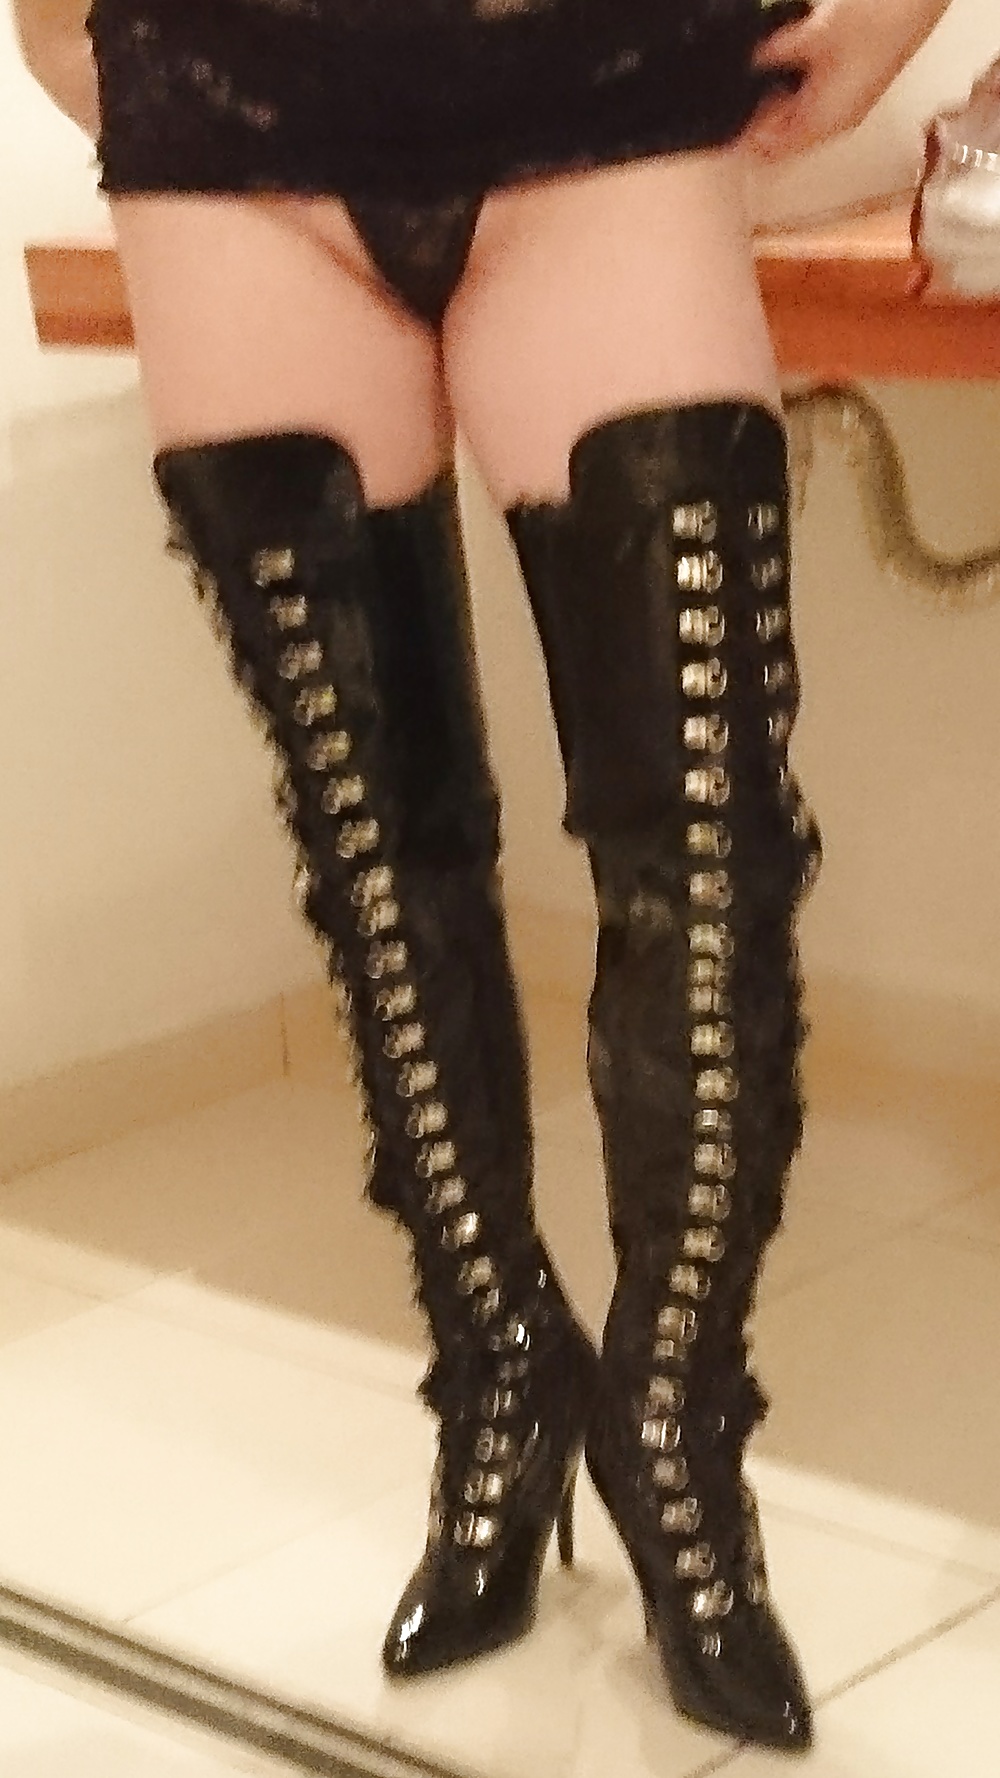 Wife in boots (8/9)